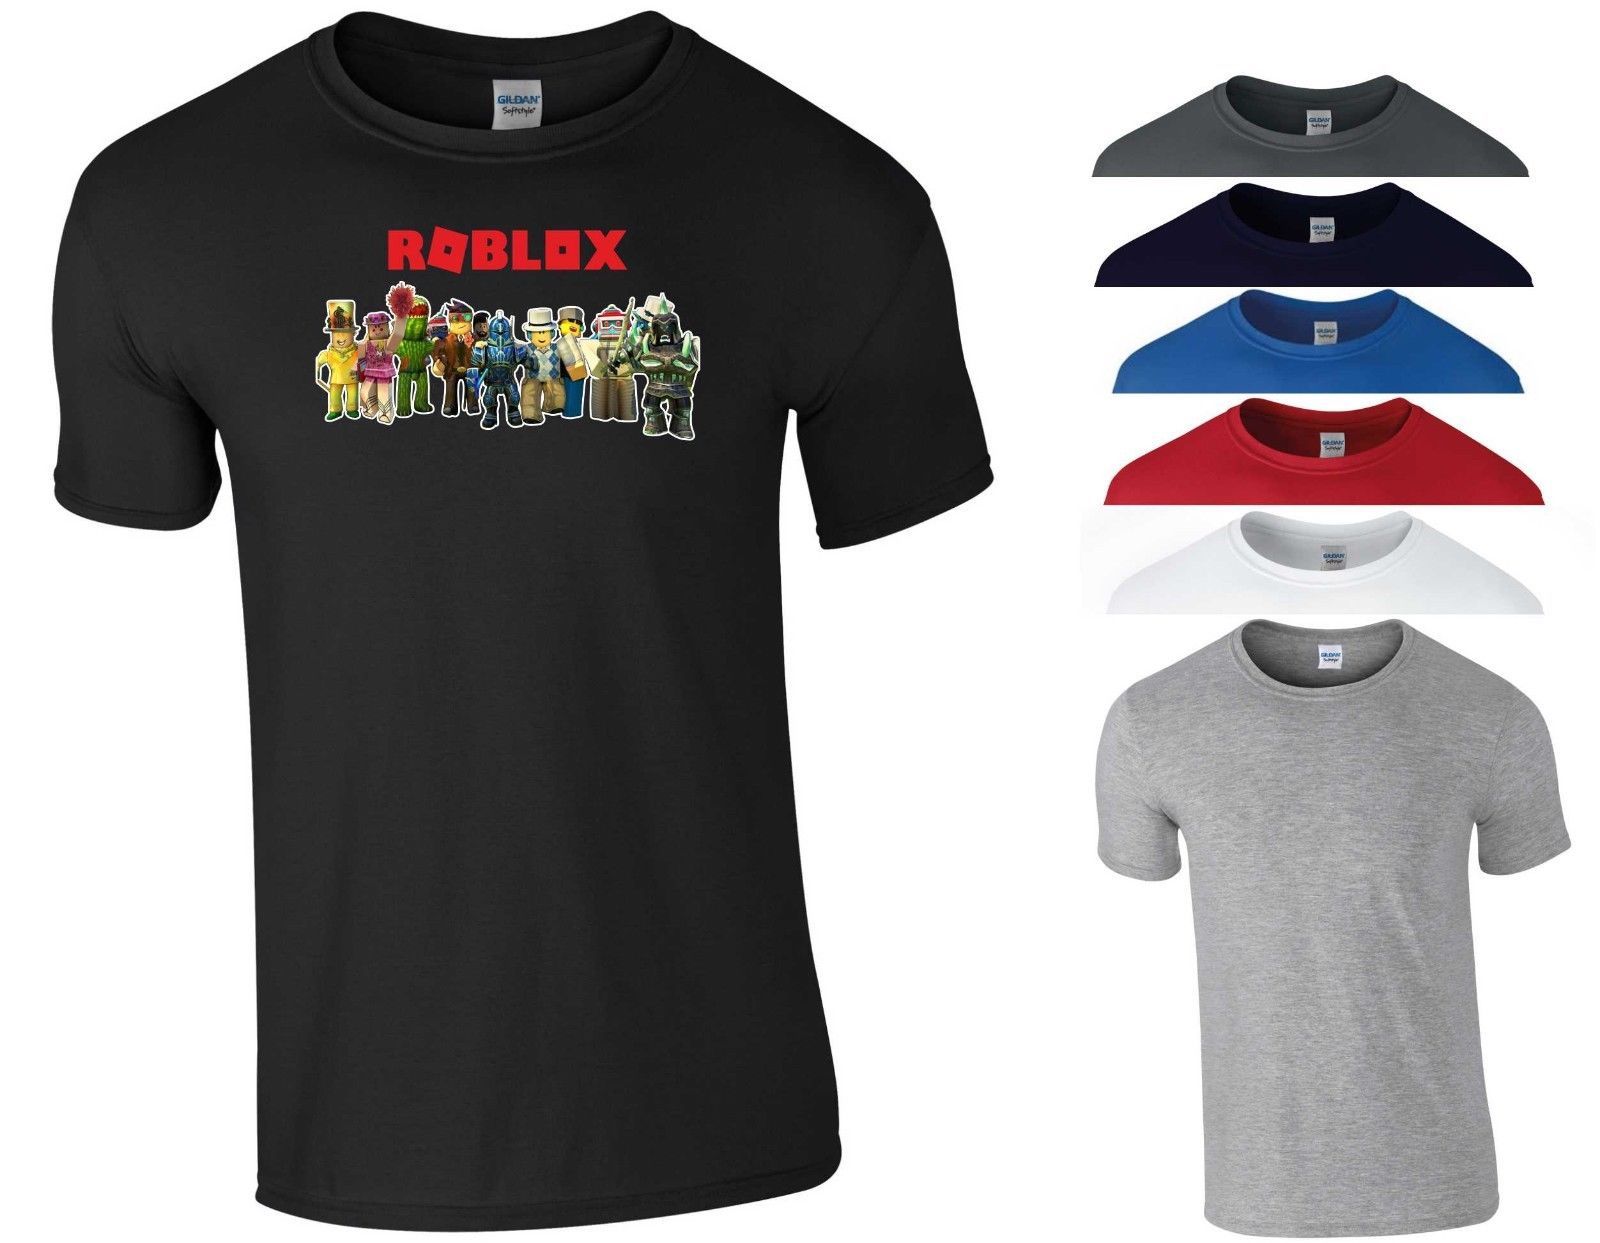 Roblox T Shirt Prison Life Builder Video Games Funny Ps4 Xbox Gift